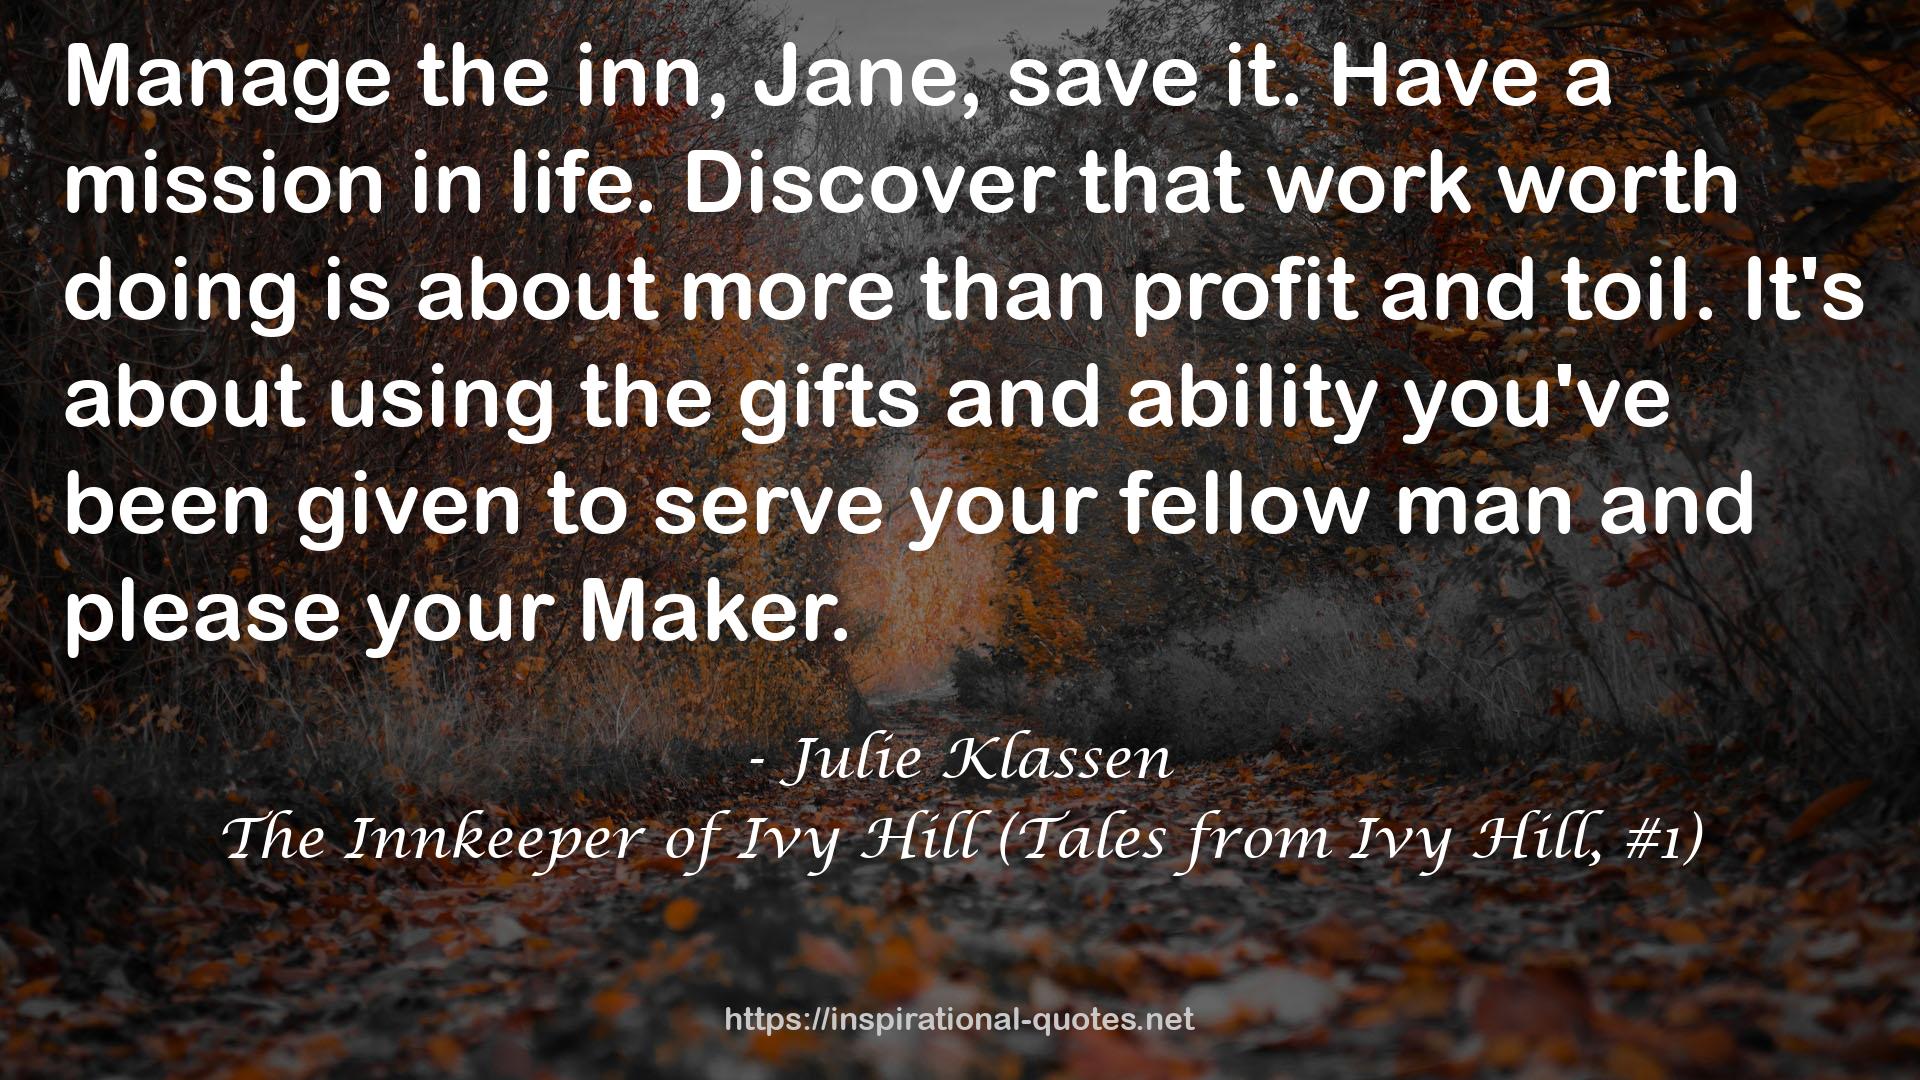 The Innkeeper of Ivy Hill (Tales from Ivy Hill, #1) QUOTES